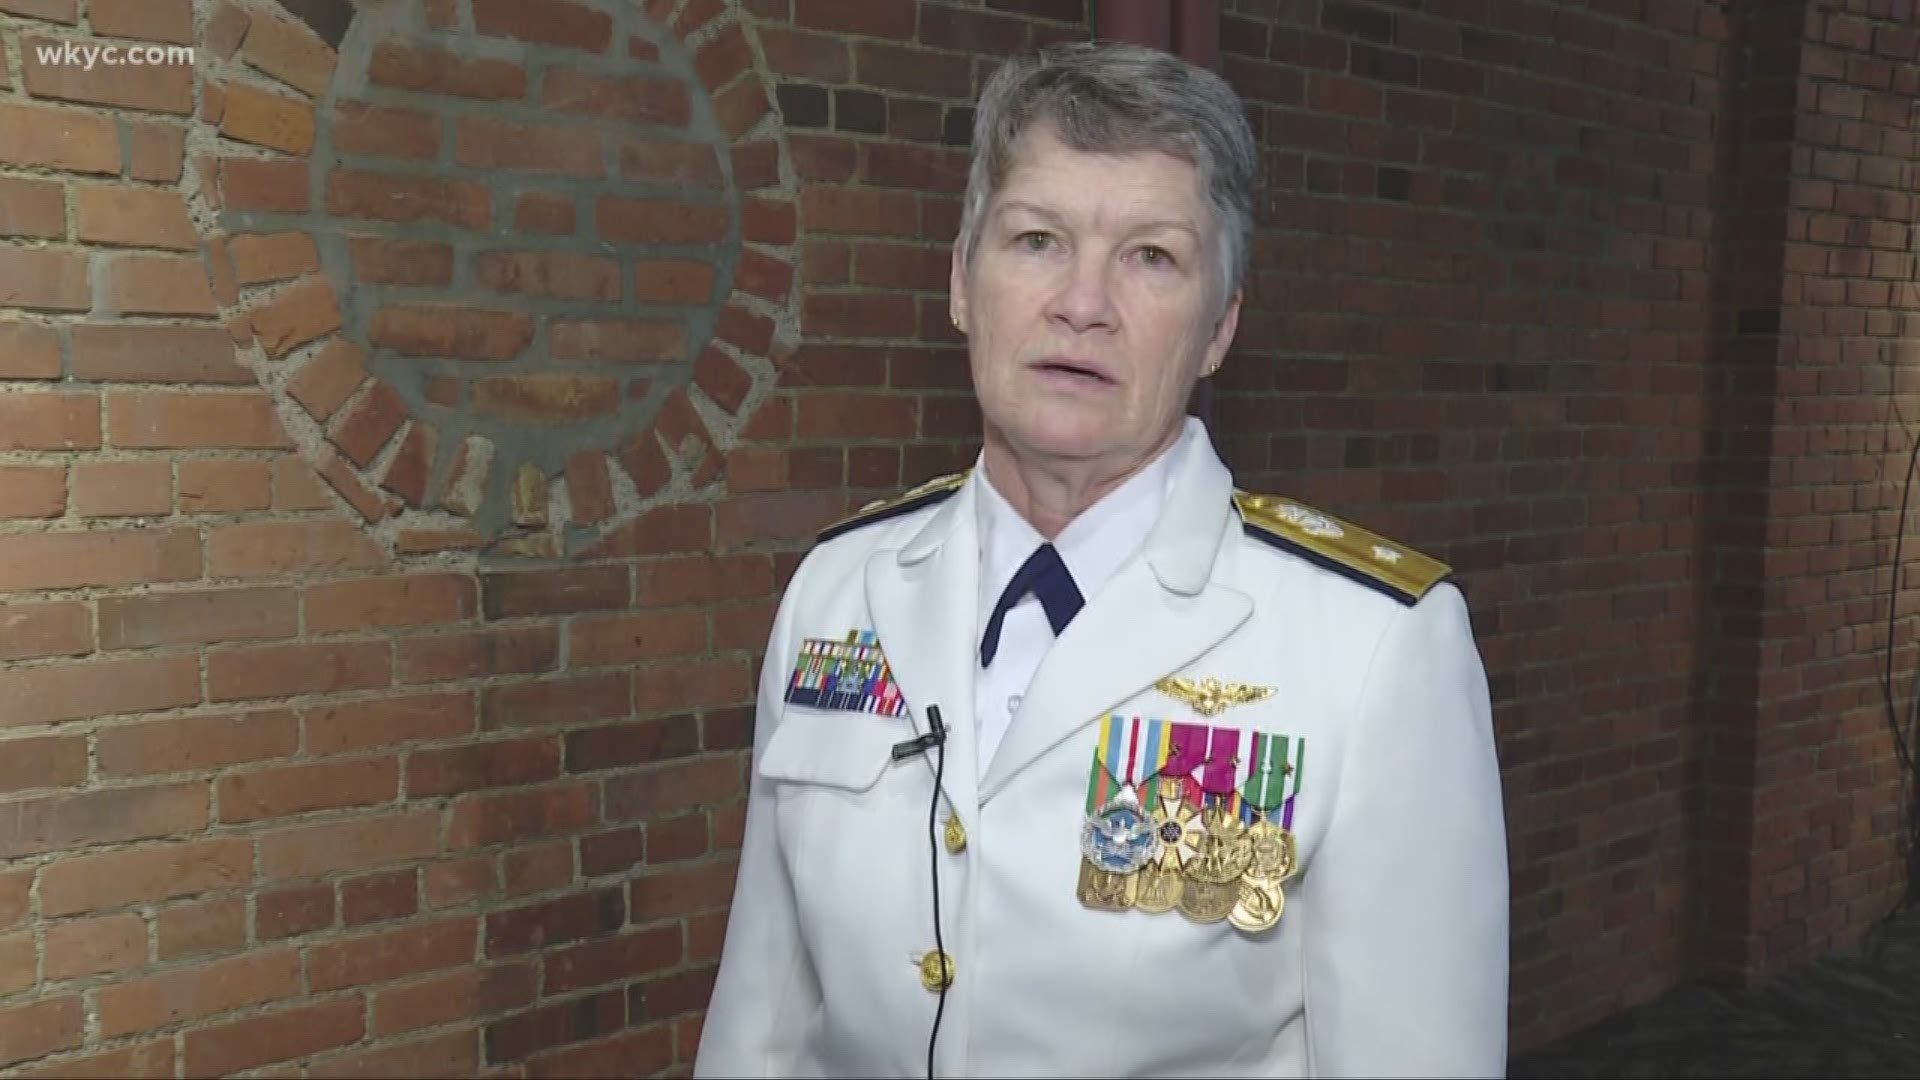 This is the third straight female admiral to command the ninth district, a first for the U.S. Coast Guard.